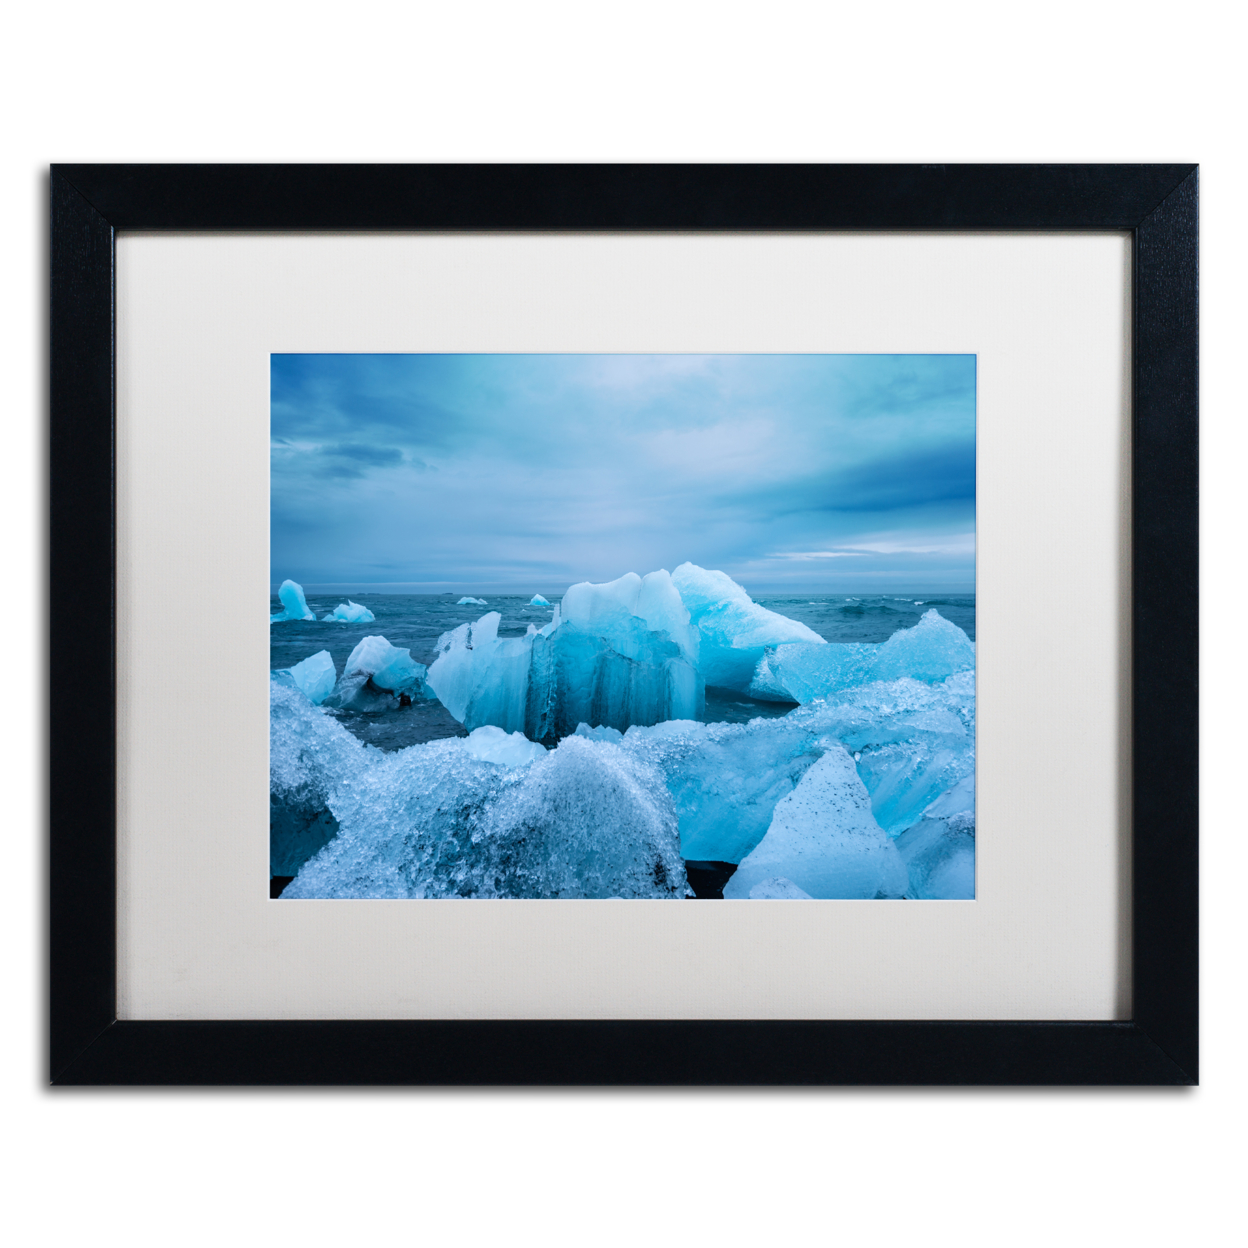 Philippe Sainte-Laudy 'Ice Park' Black Wooden Framed Art 18 X 22 Inches